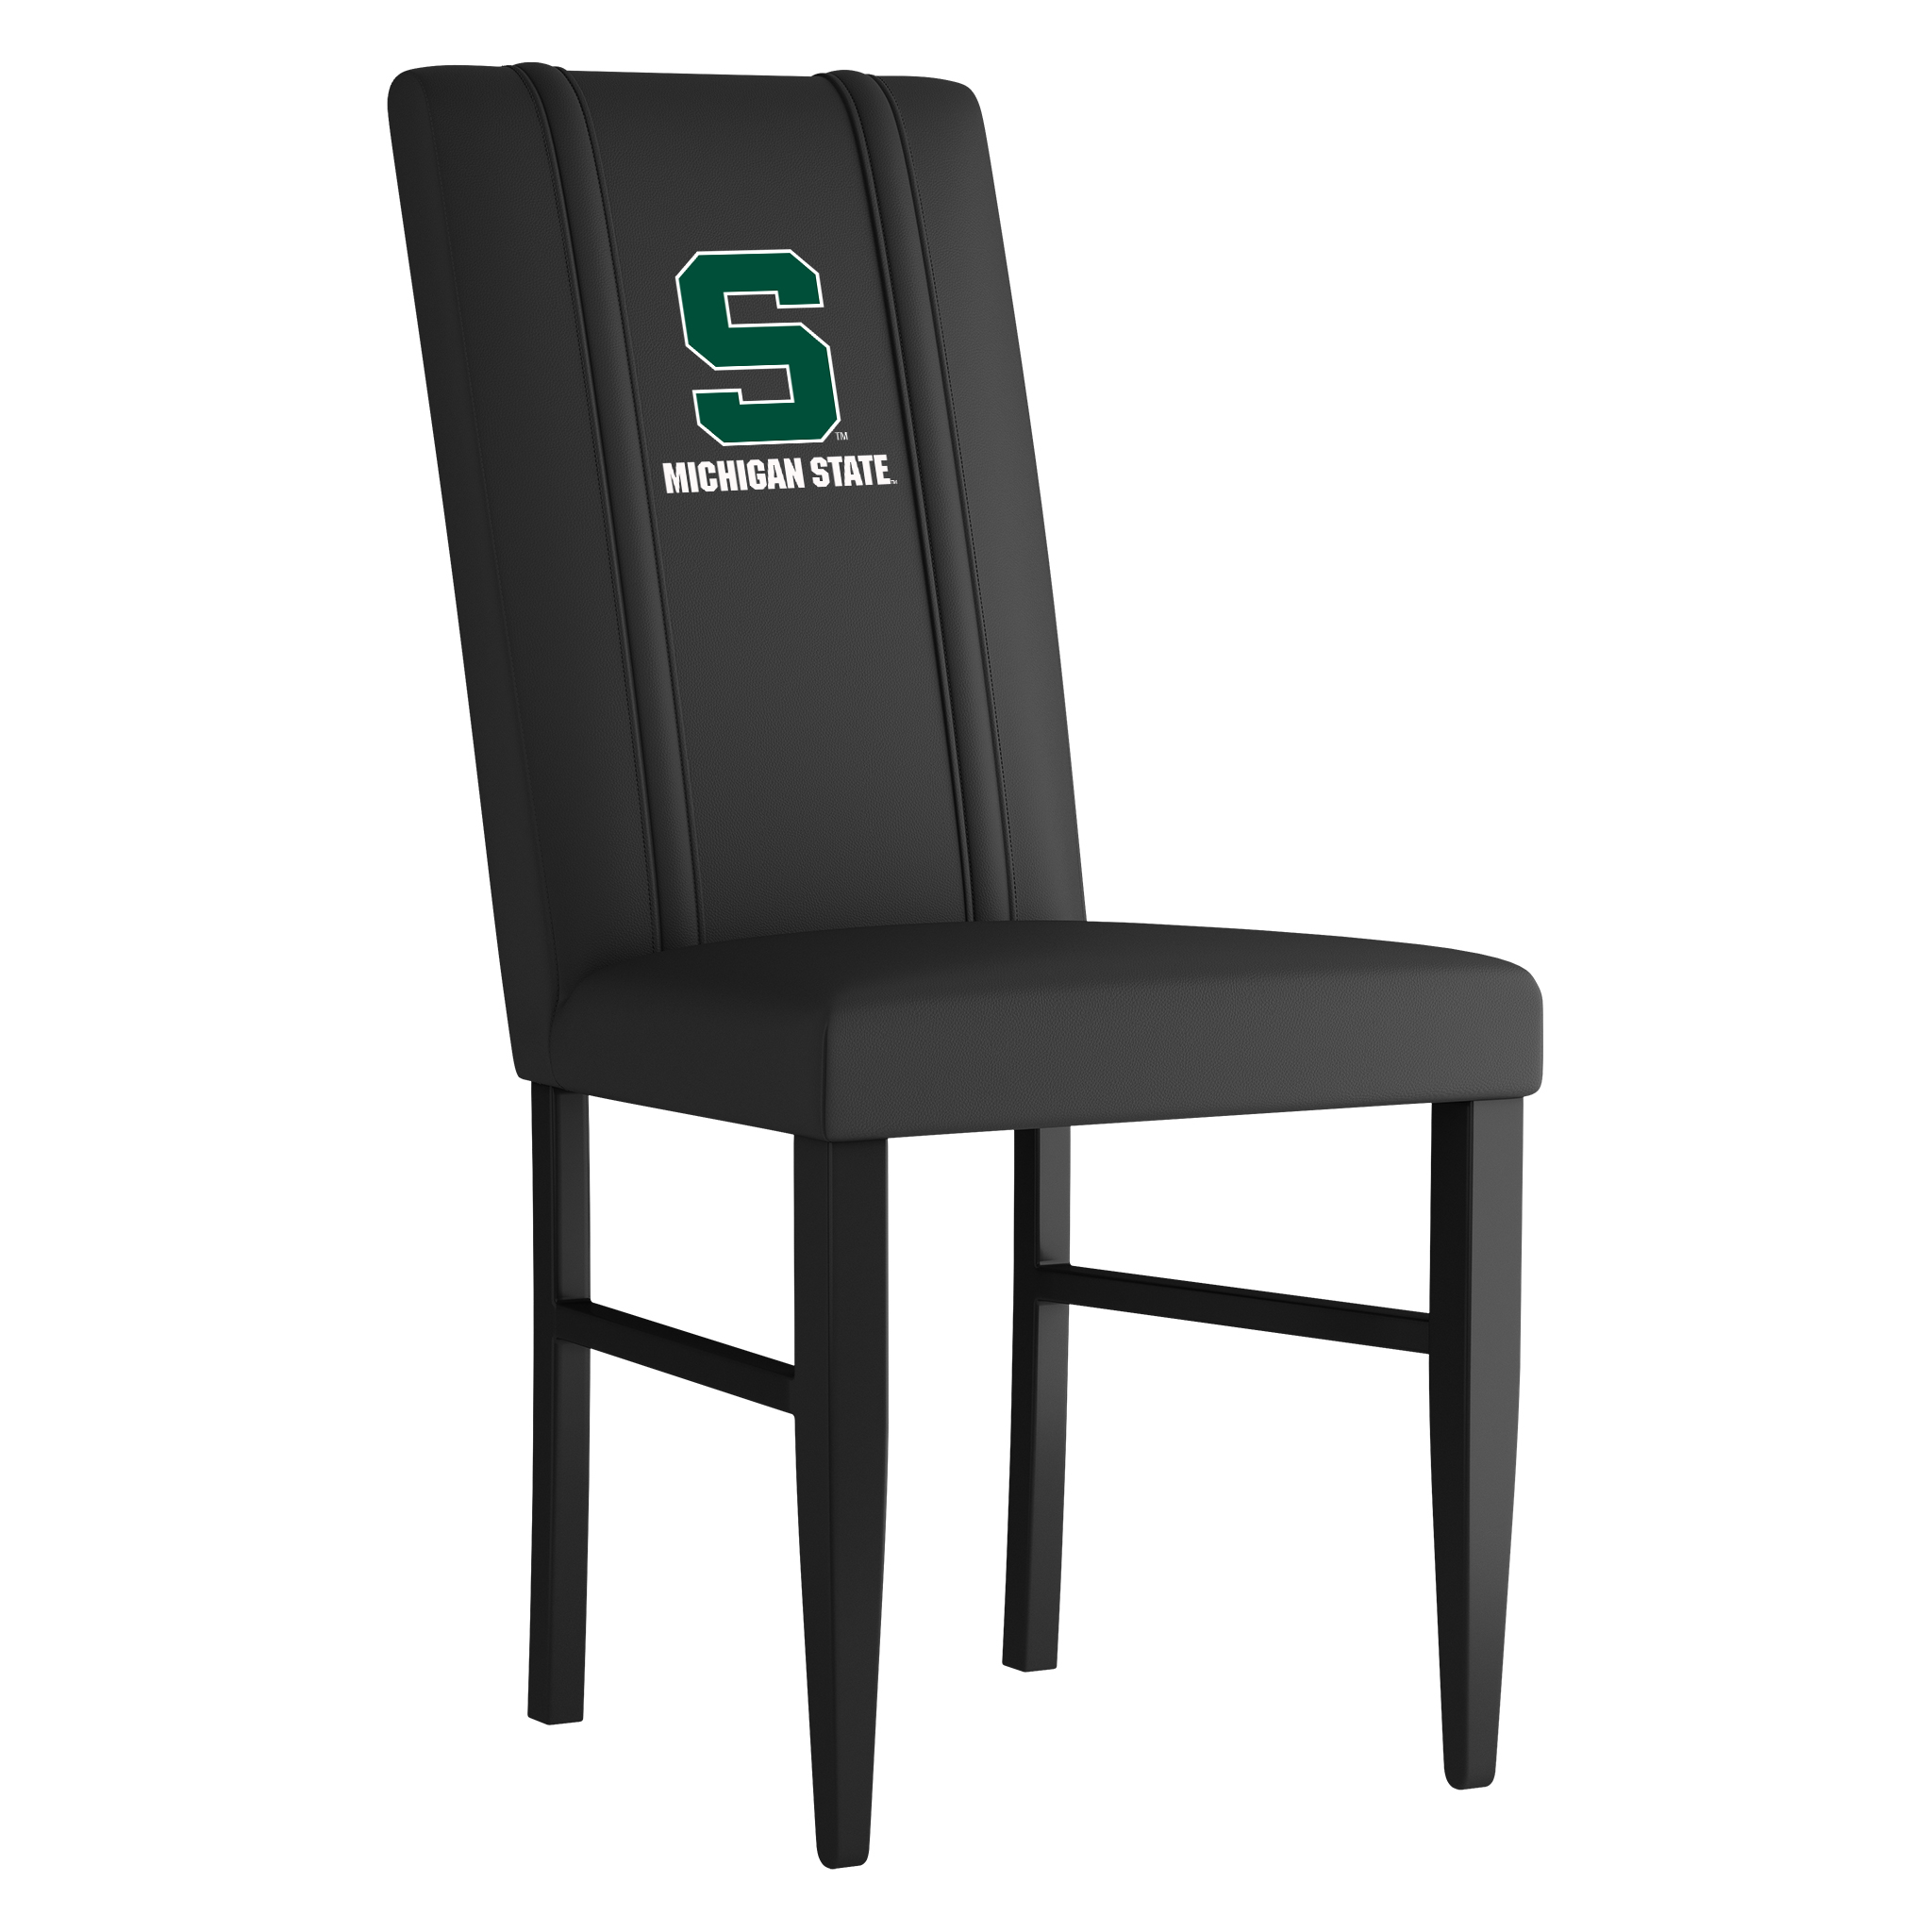 Michigan State Side Chair 2000 With Michigan State Secondary Logo